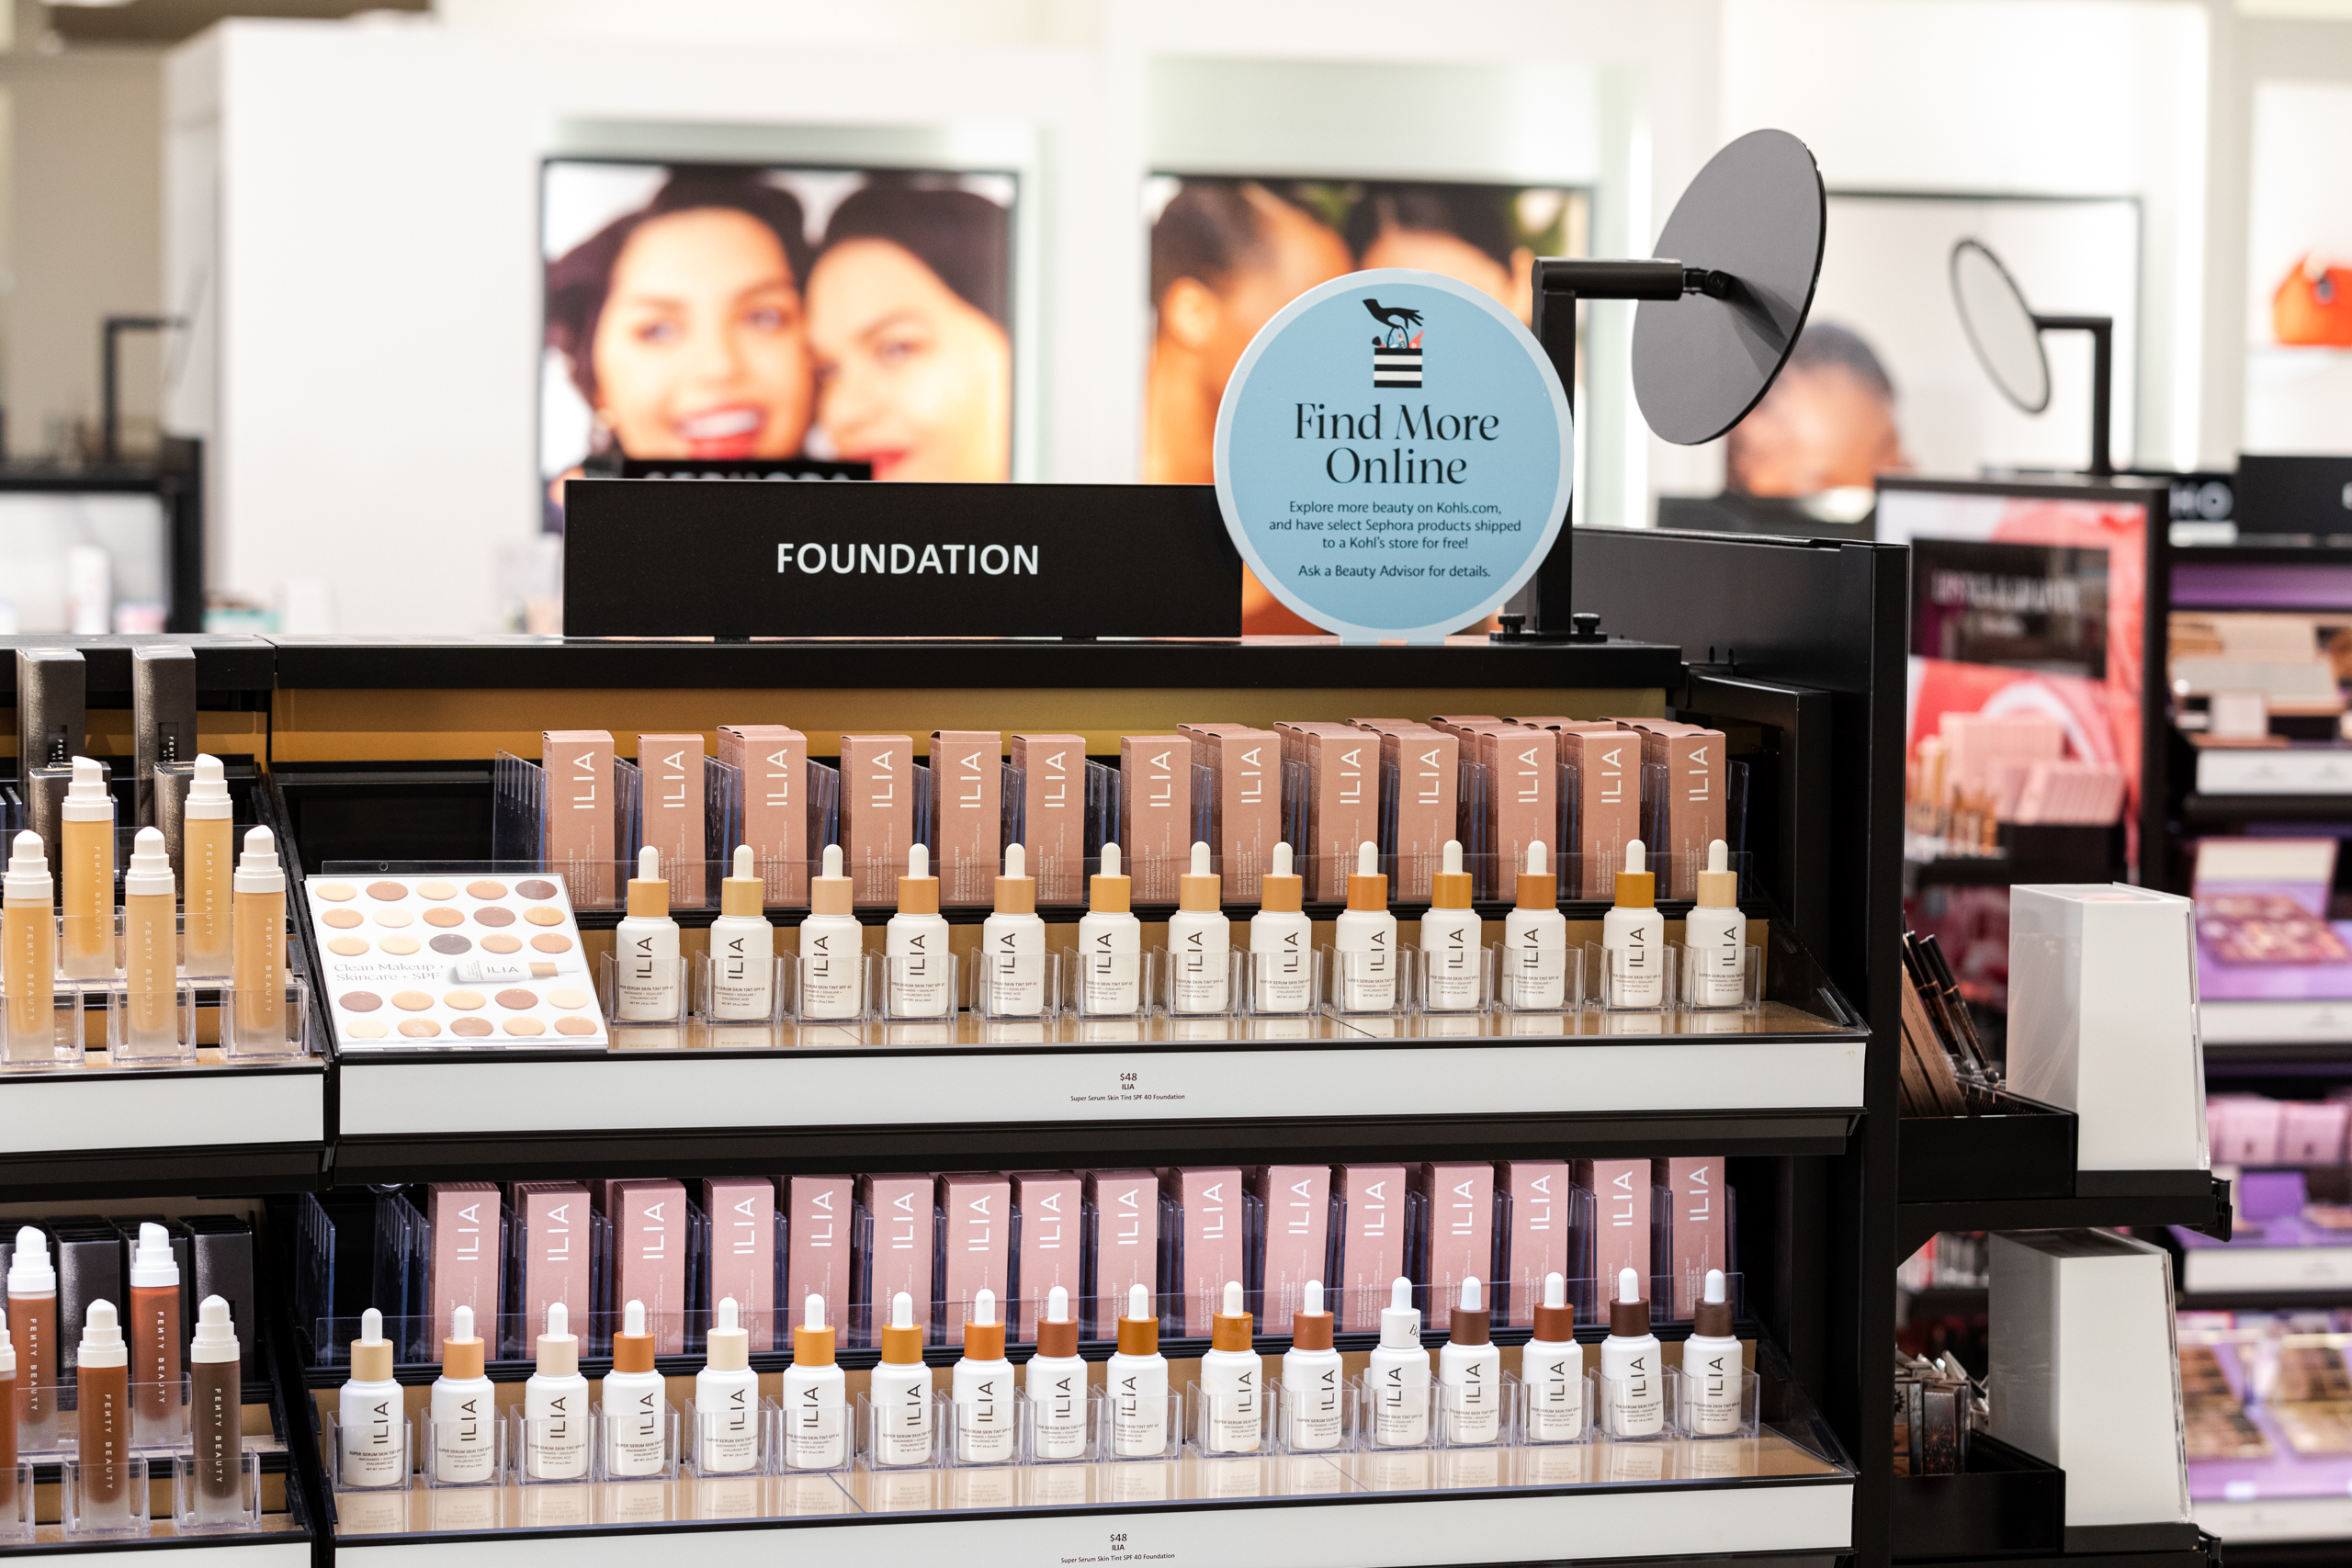 Sephora to take over cosmetics in Kohl's stores